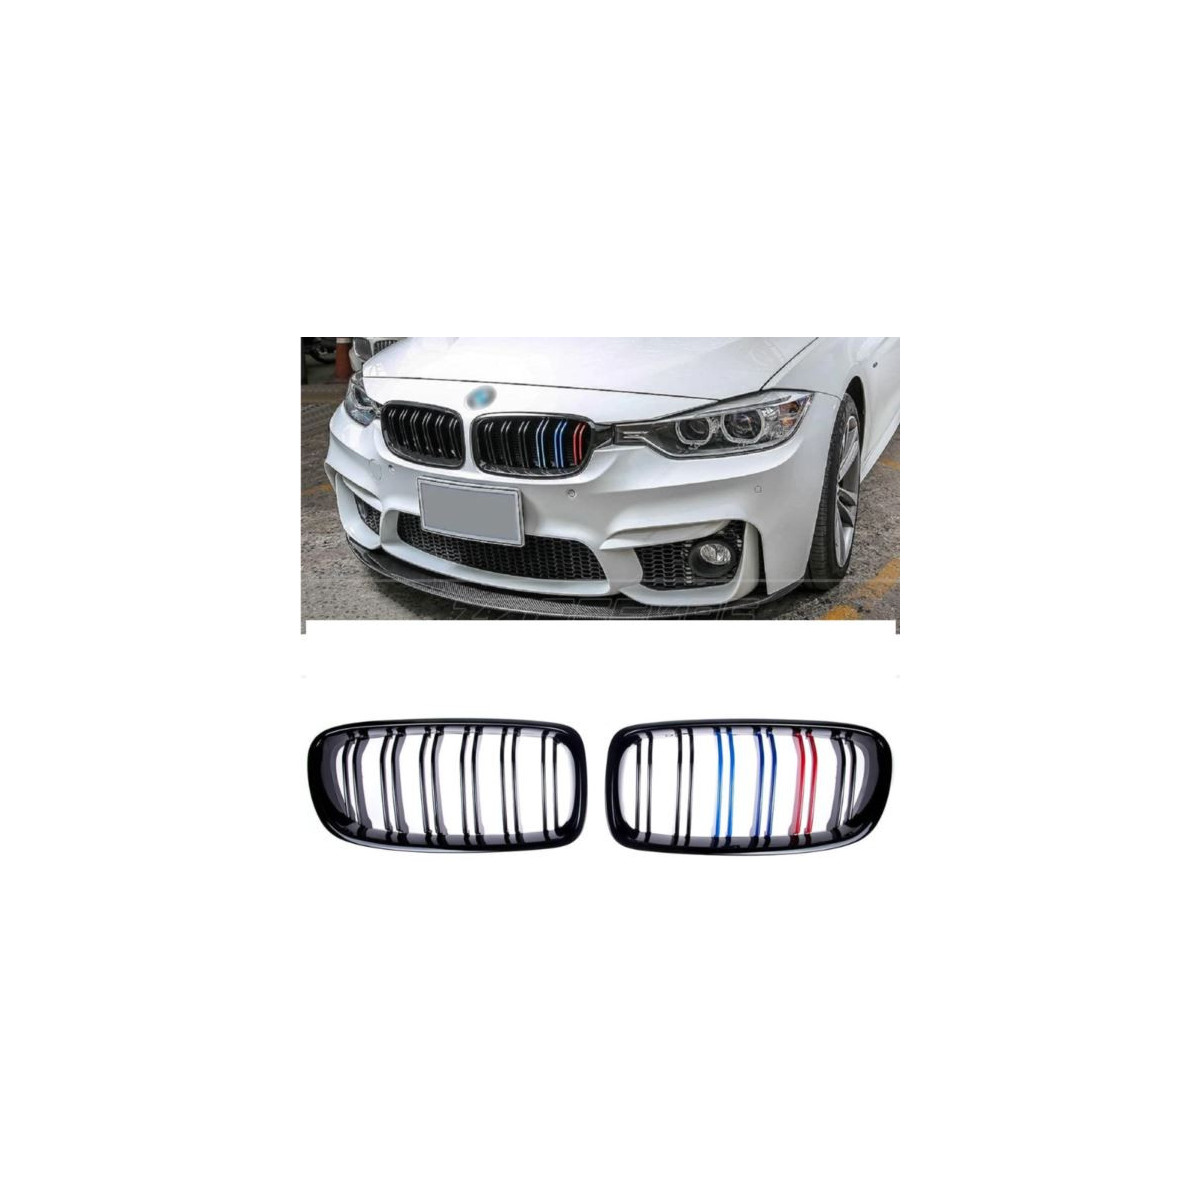 GRILL BMW F30 11-18 DOUBLE LINE 3 KOLOR